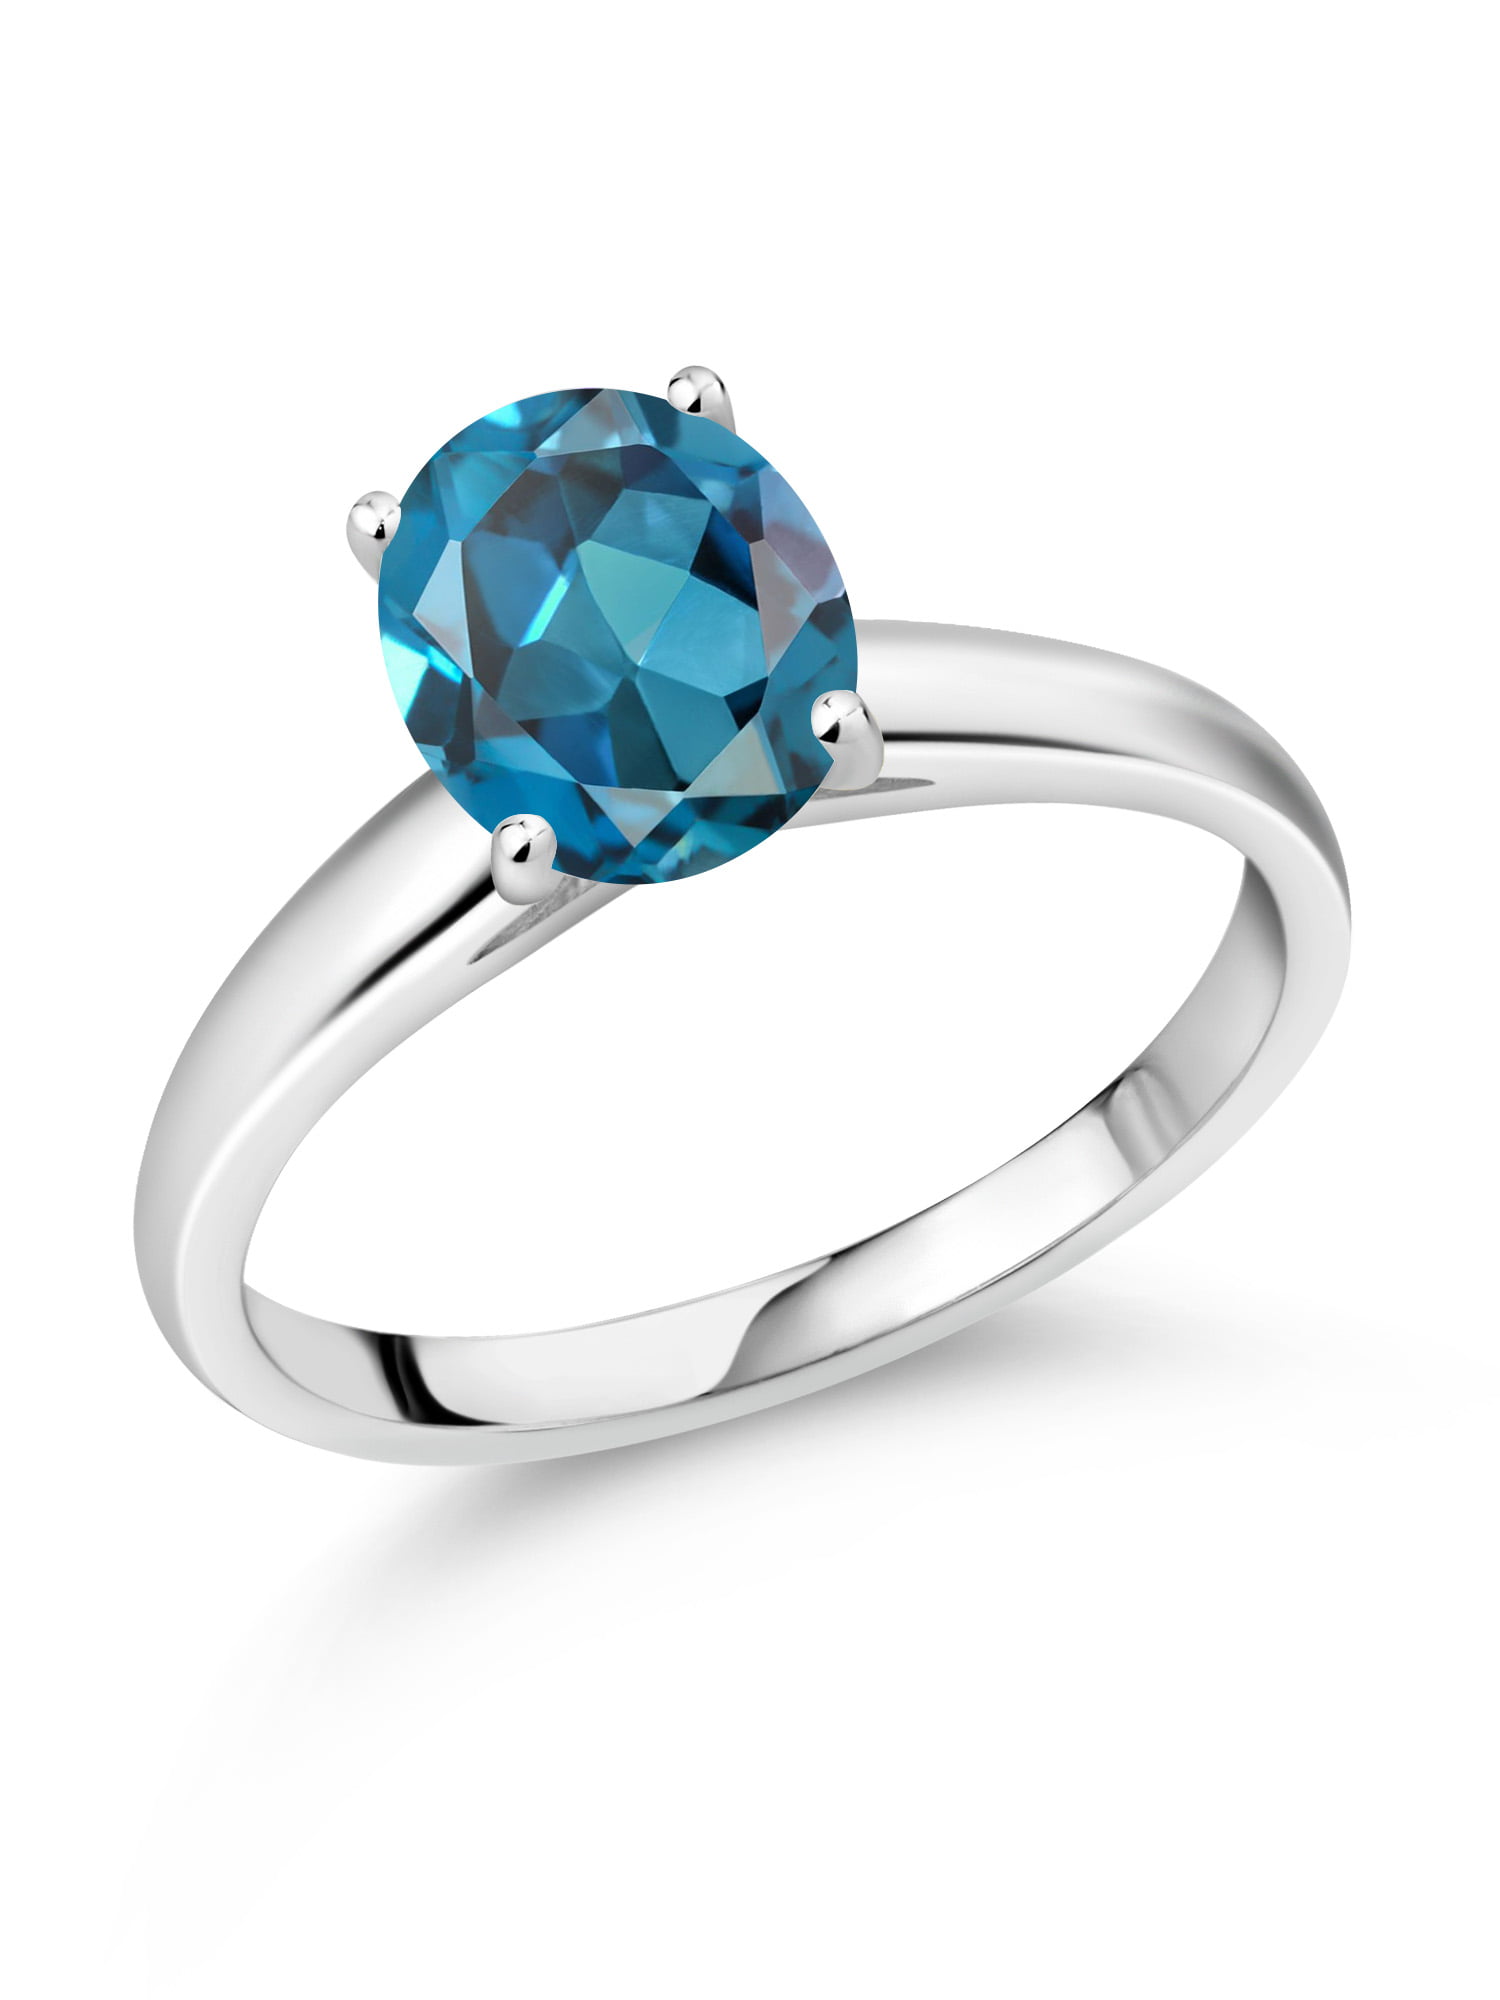 Gem Stone King 1.58 Ct London Blue Topaz White Created Sapphire 925 Sterling Silver Ring